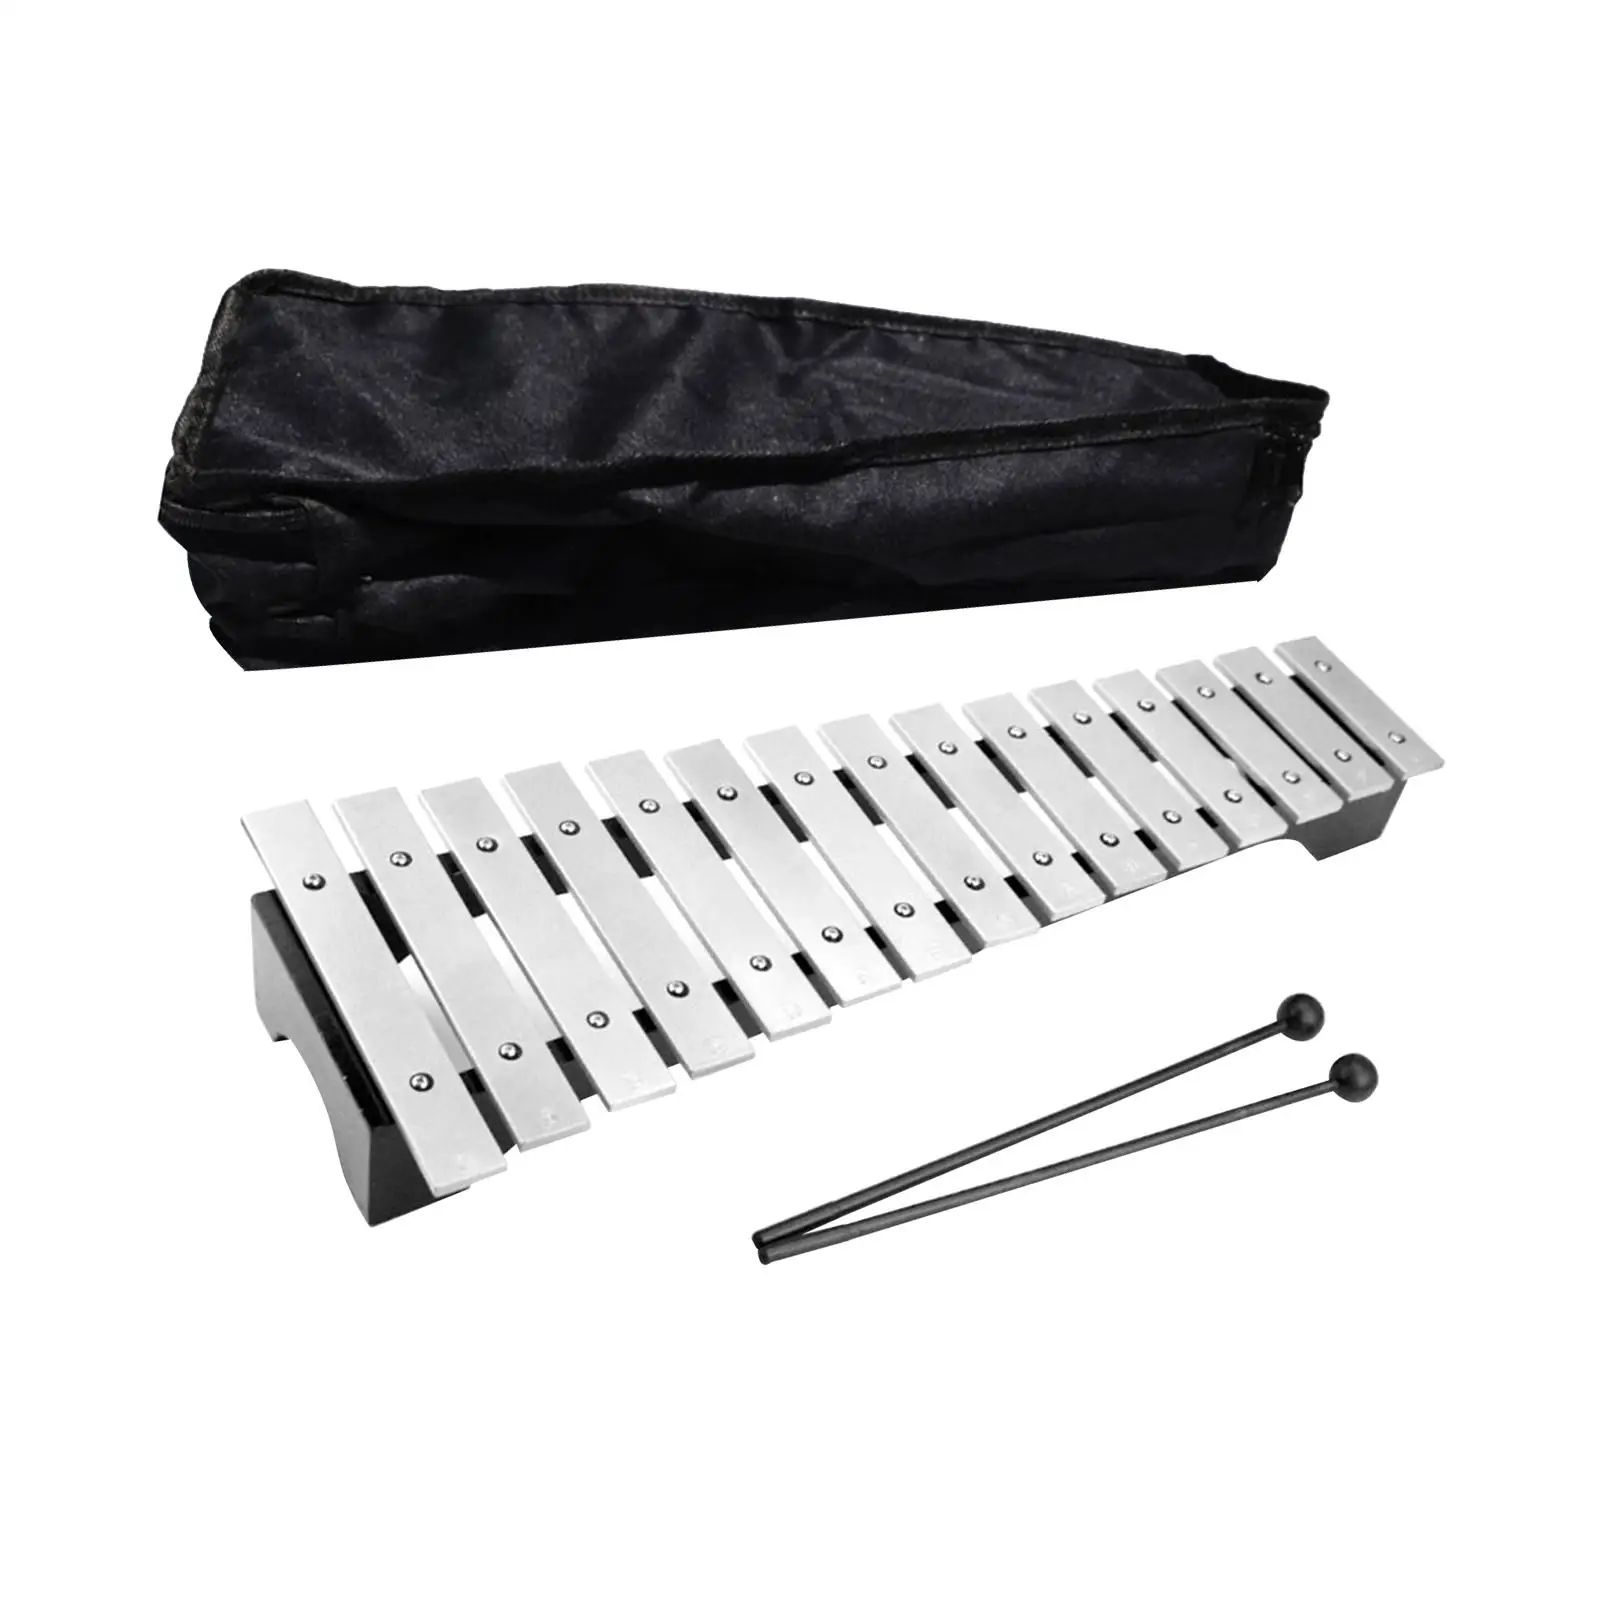 15 Scales Xylophone with Carry Case and Mallets for Kids Players